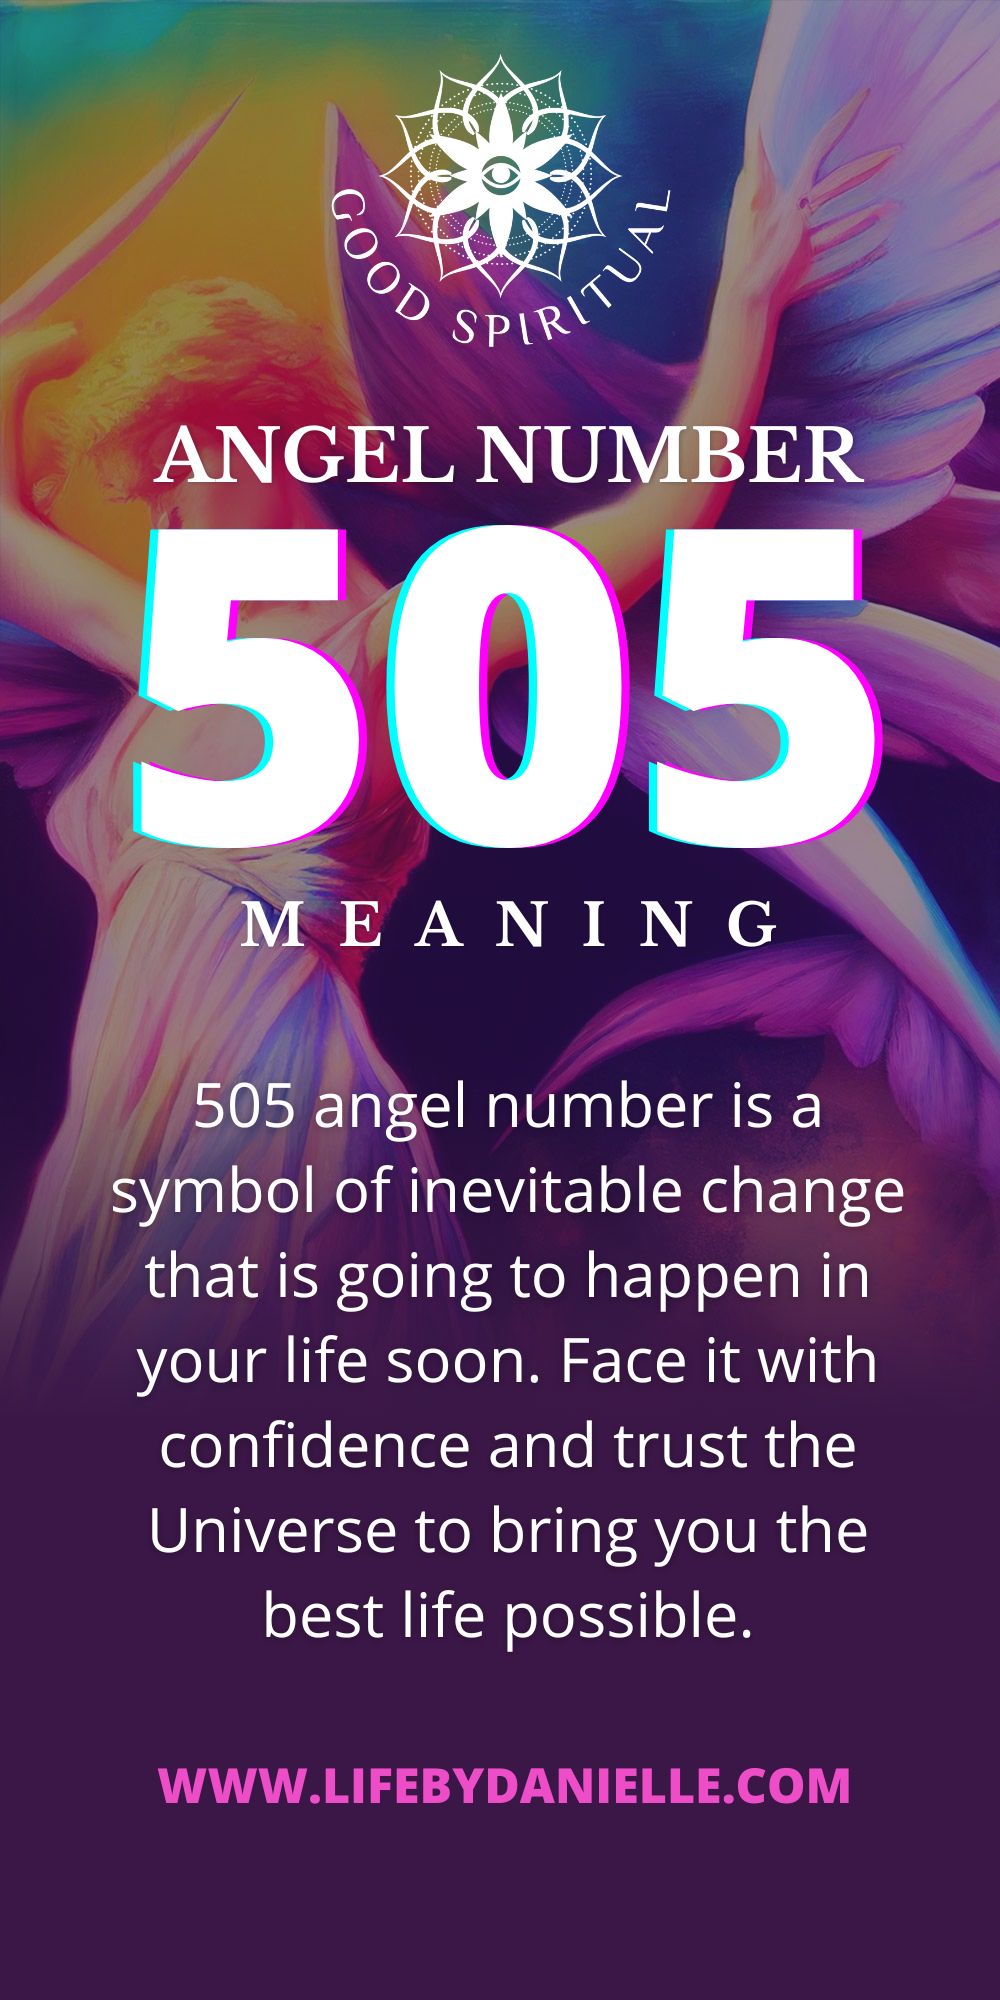 Angel number 505 meaning